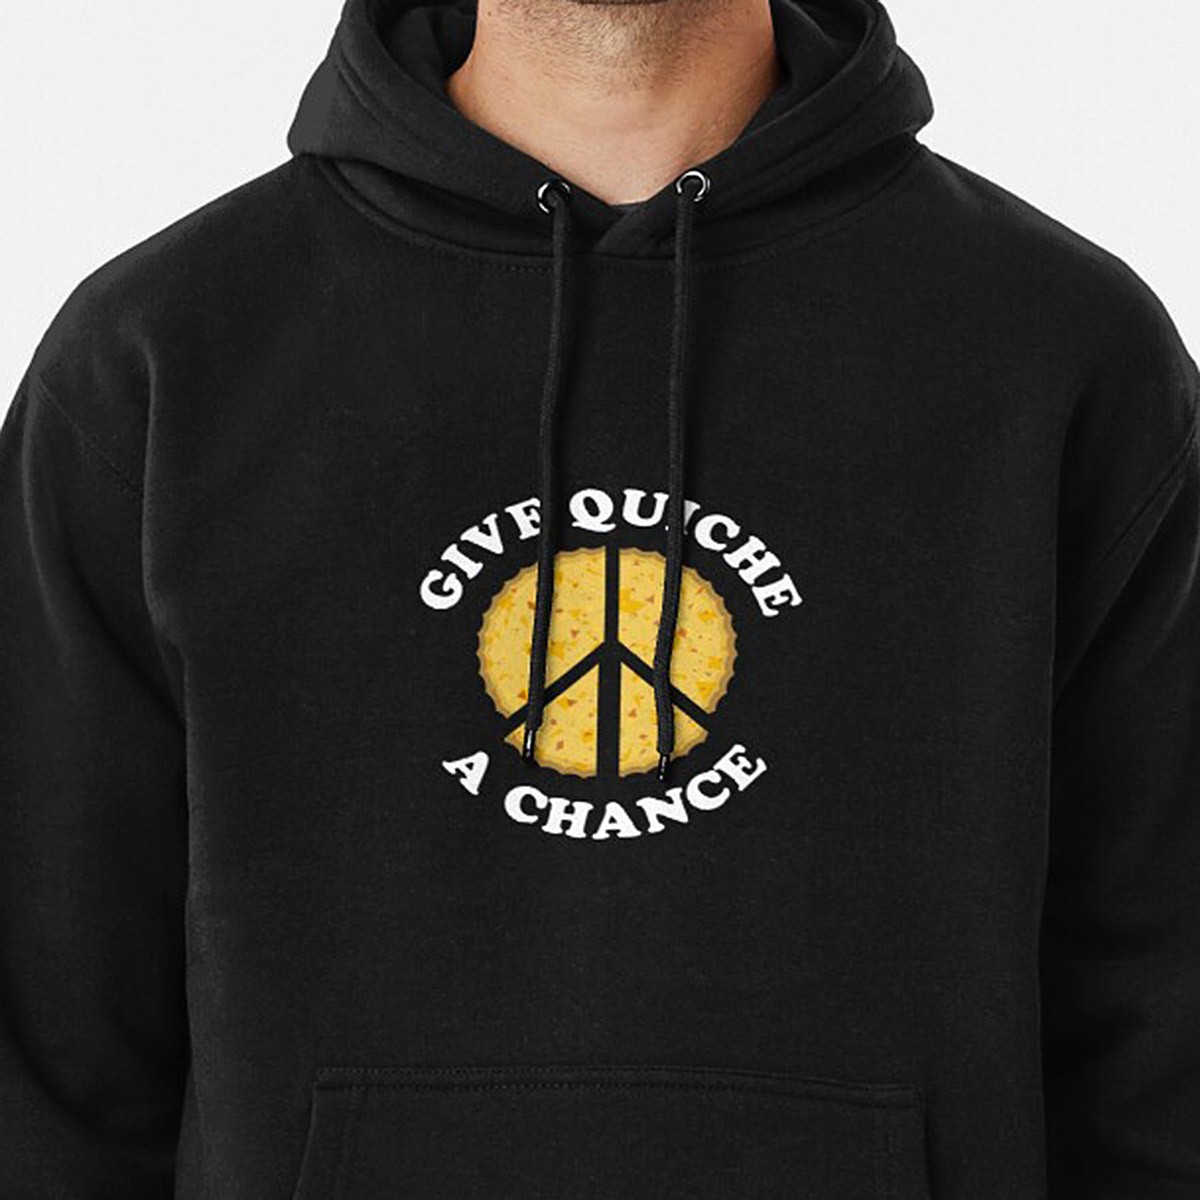 Give Quiche a Chance! Pullover Hoodie by NTK Apparel